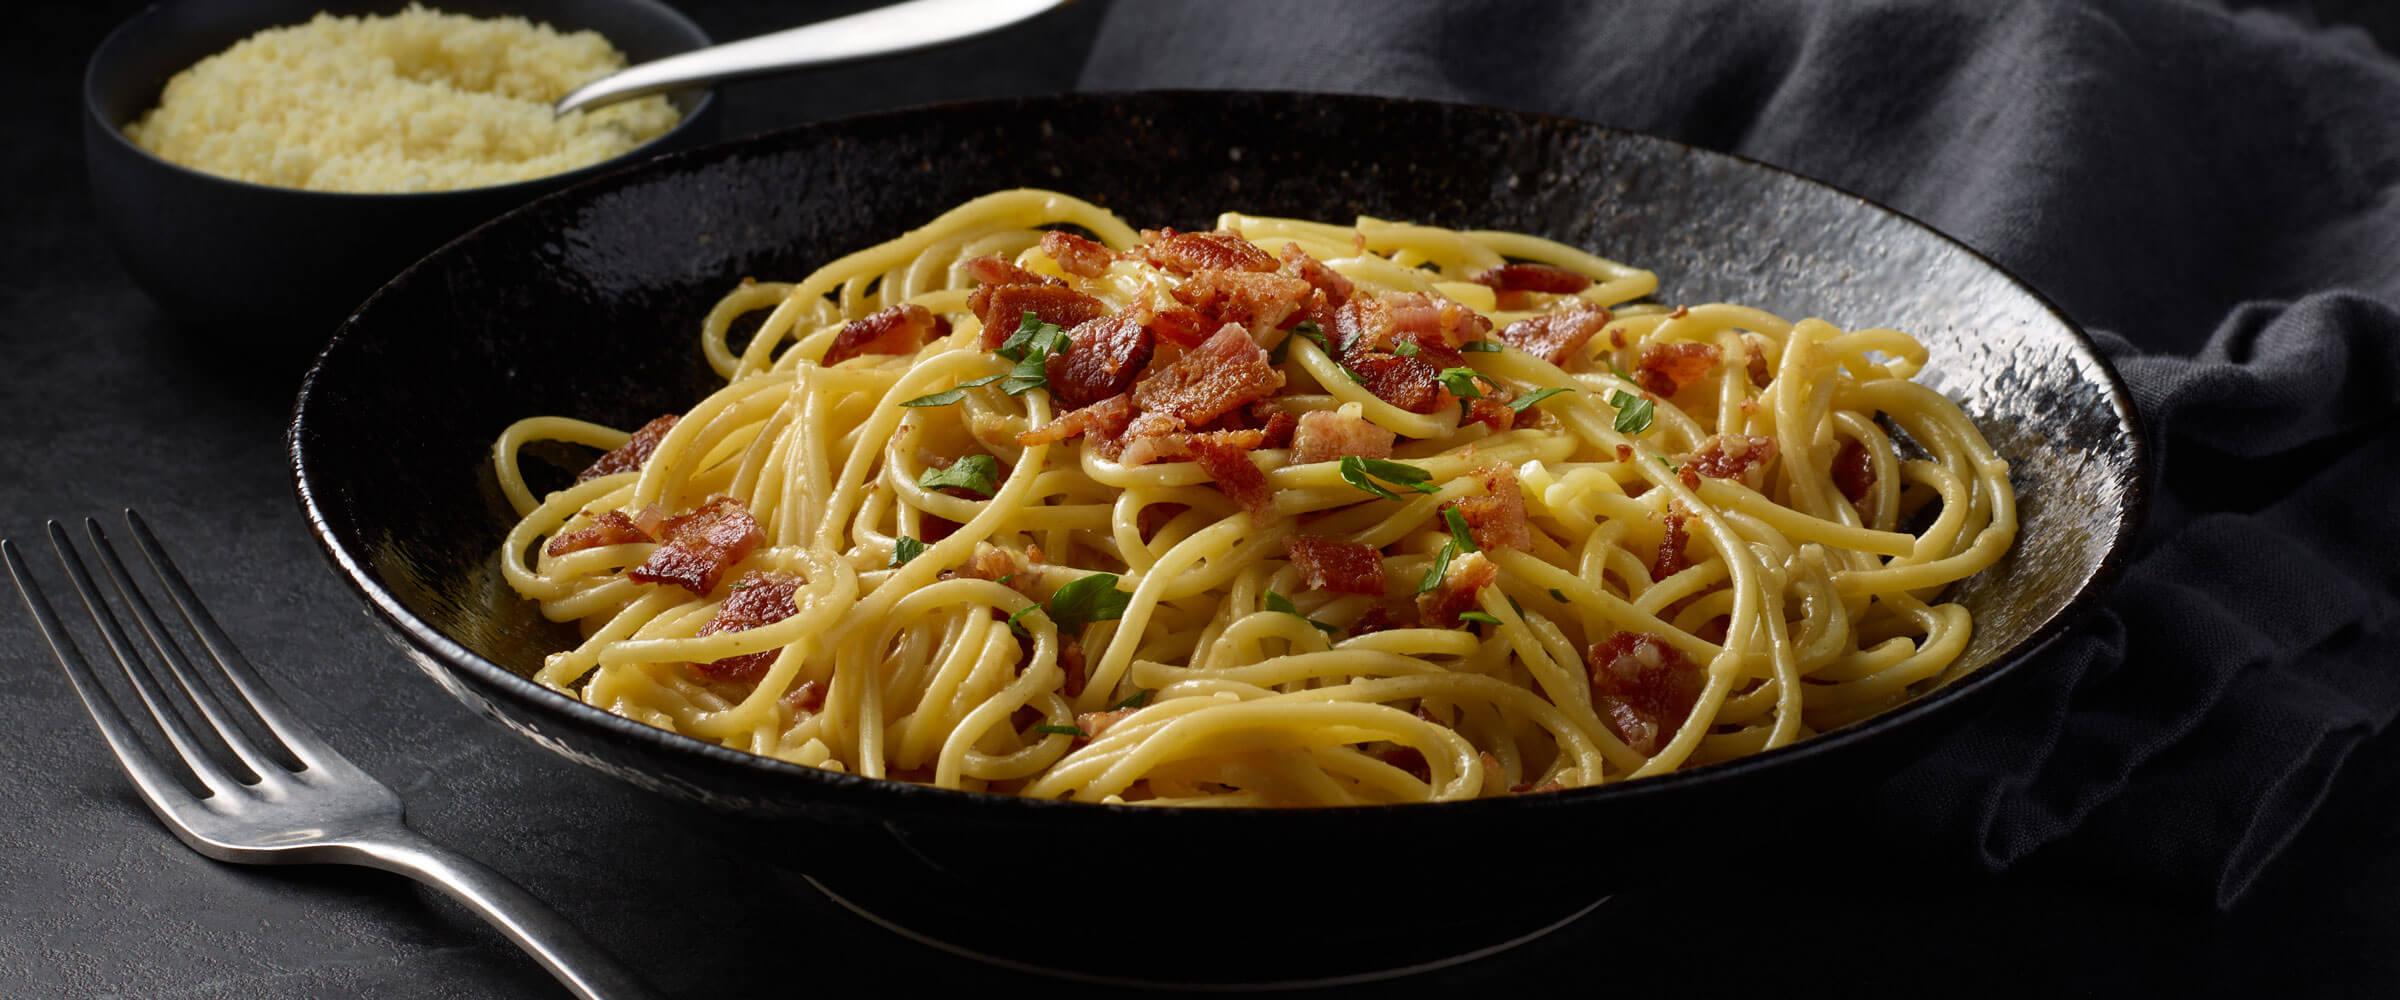 Pasta Carbonara topped with bacon in black bowl with fork